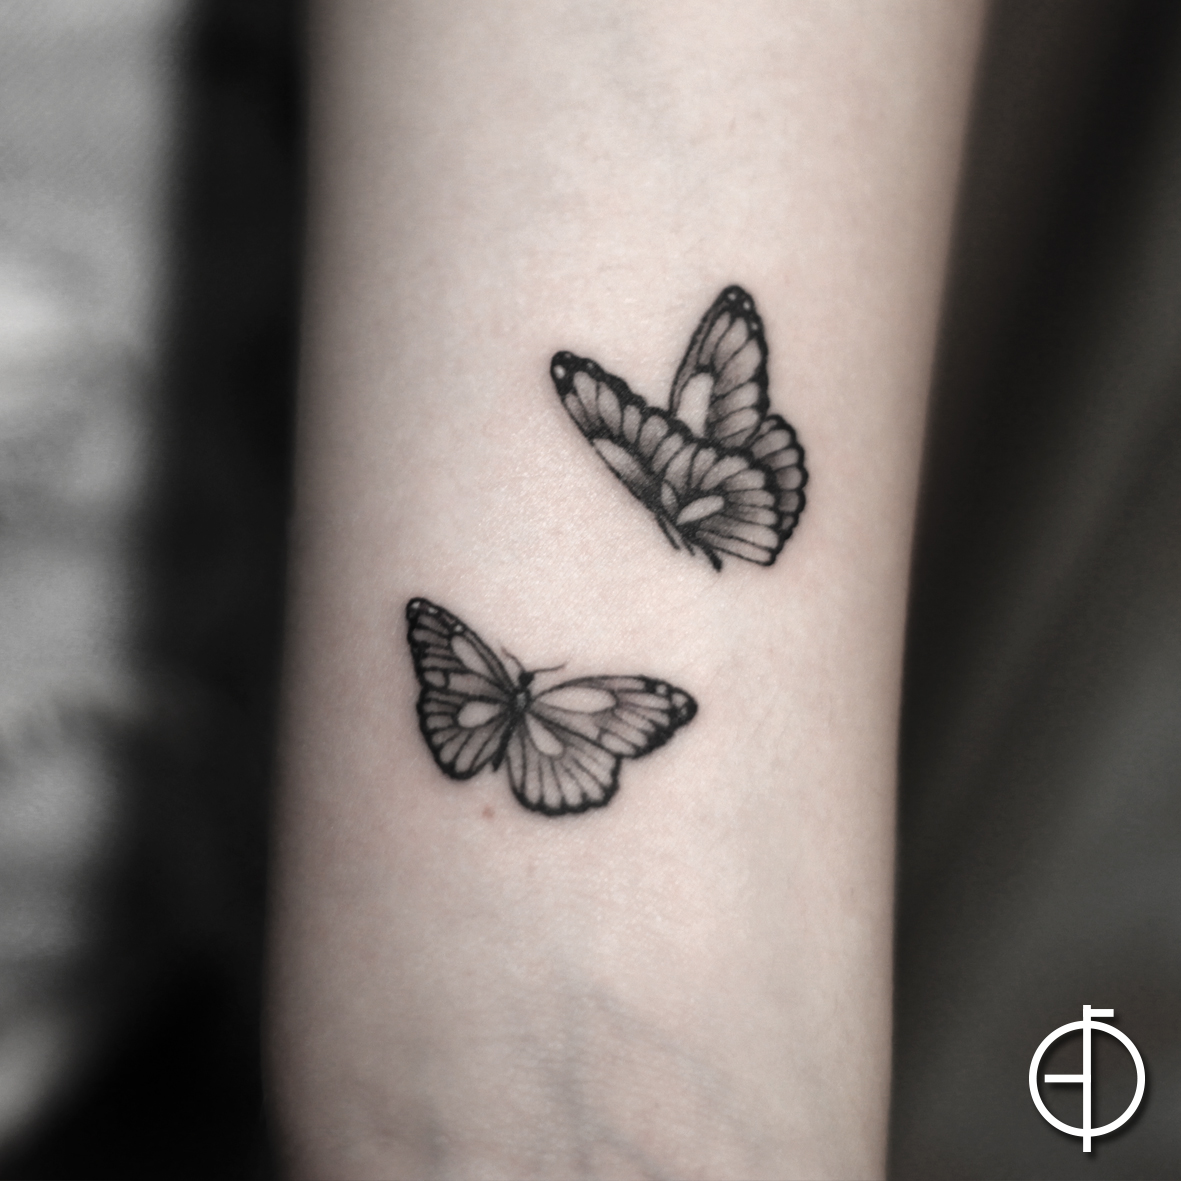 Two butterflies on my friends ankle Super happy with how it turned out  my line work is getting better lets mee on insta merelpokes   rsticknpokes